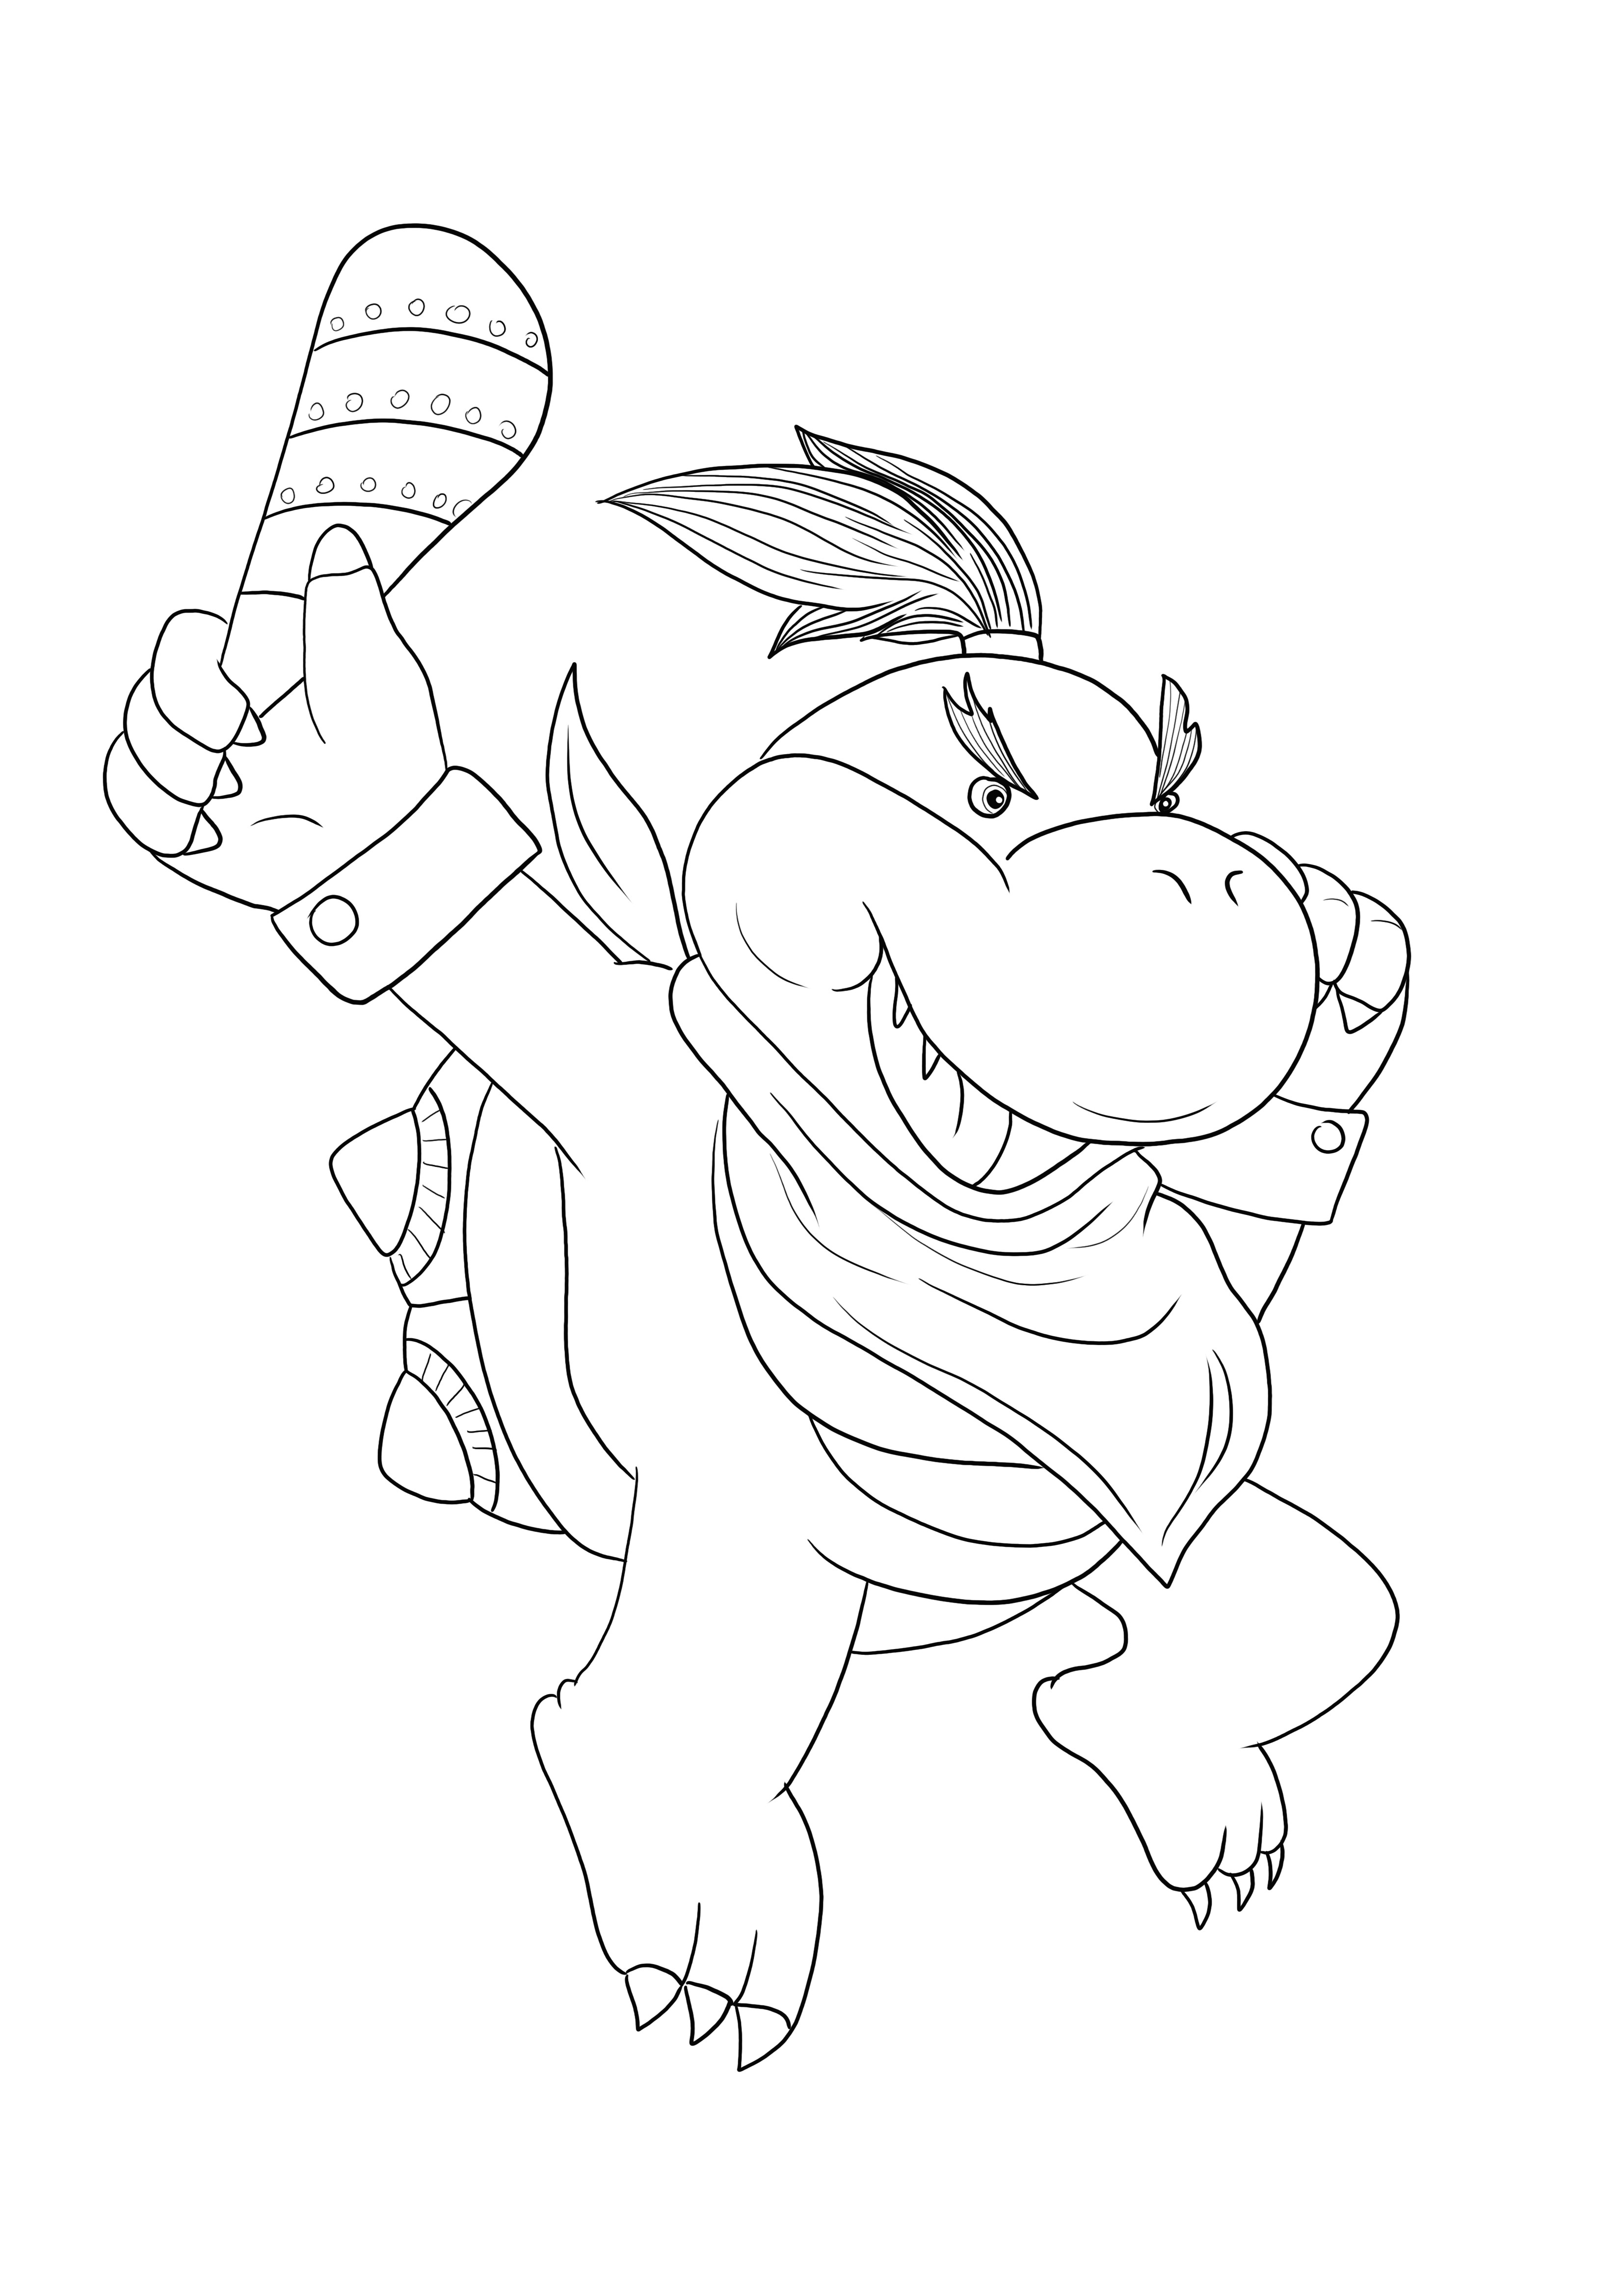 Bowser Jr from the Super Mario game is ready to be printed and colored by kids of all ages